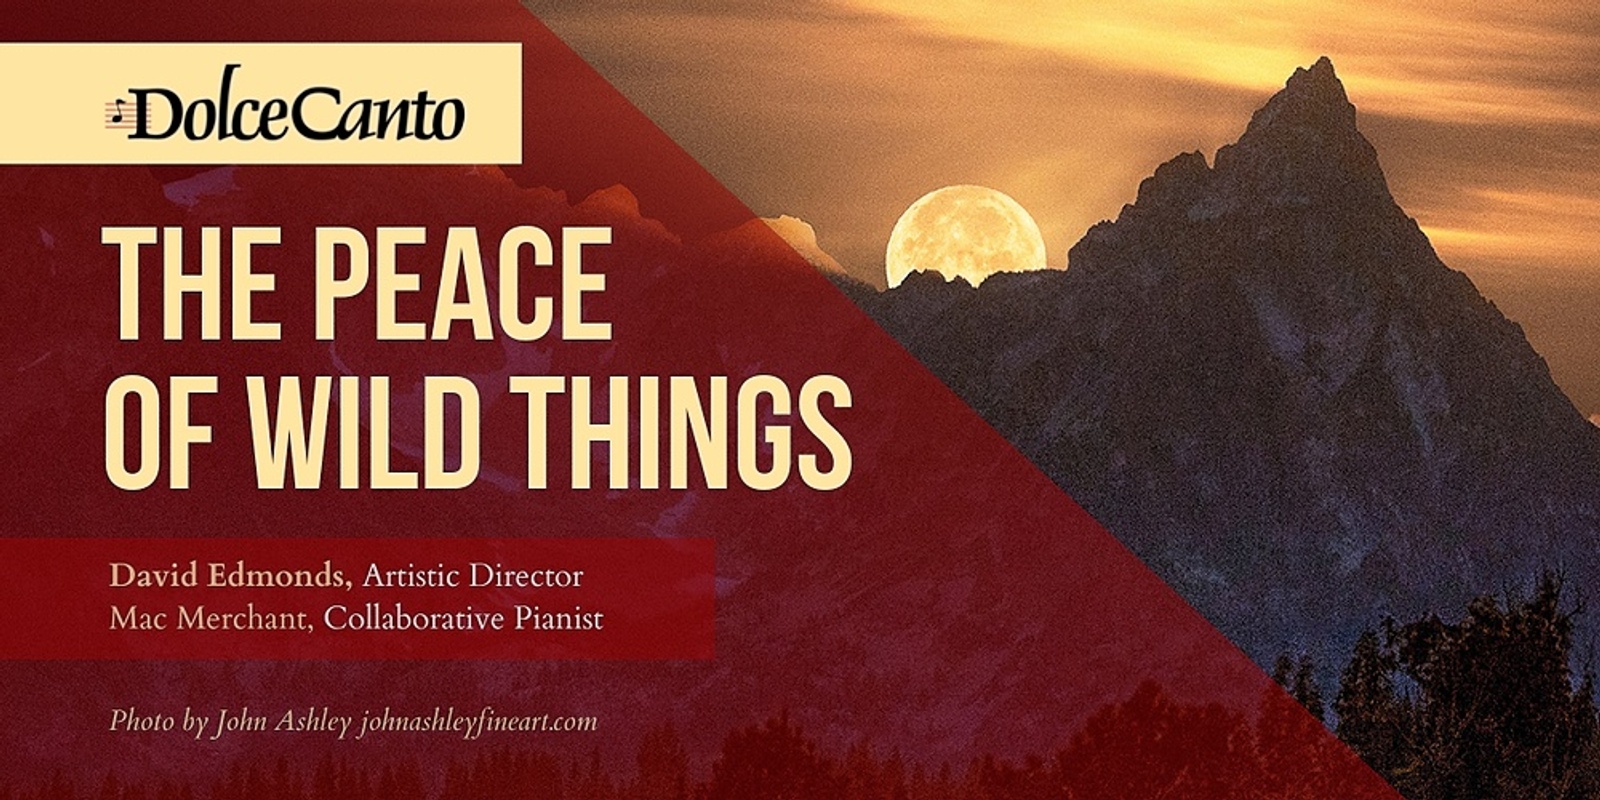 Banner image for The Peace of Wild Things (Victor)